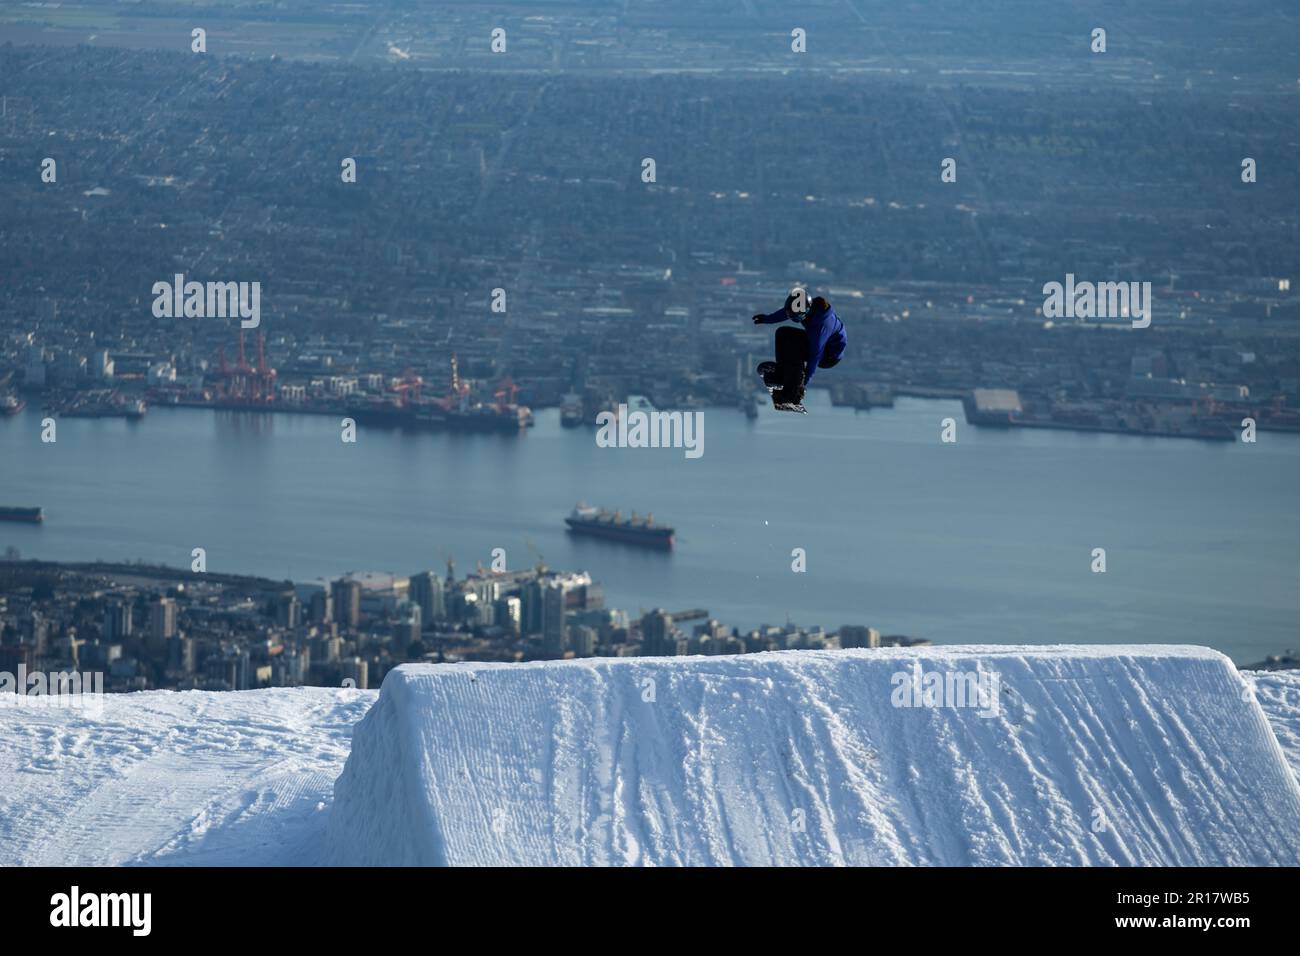 Snowboarder Hits Jump Overlooking View of Vancouver Canada Stock Photo